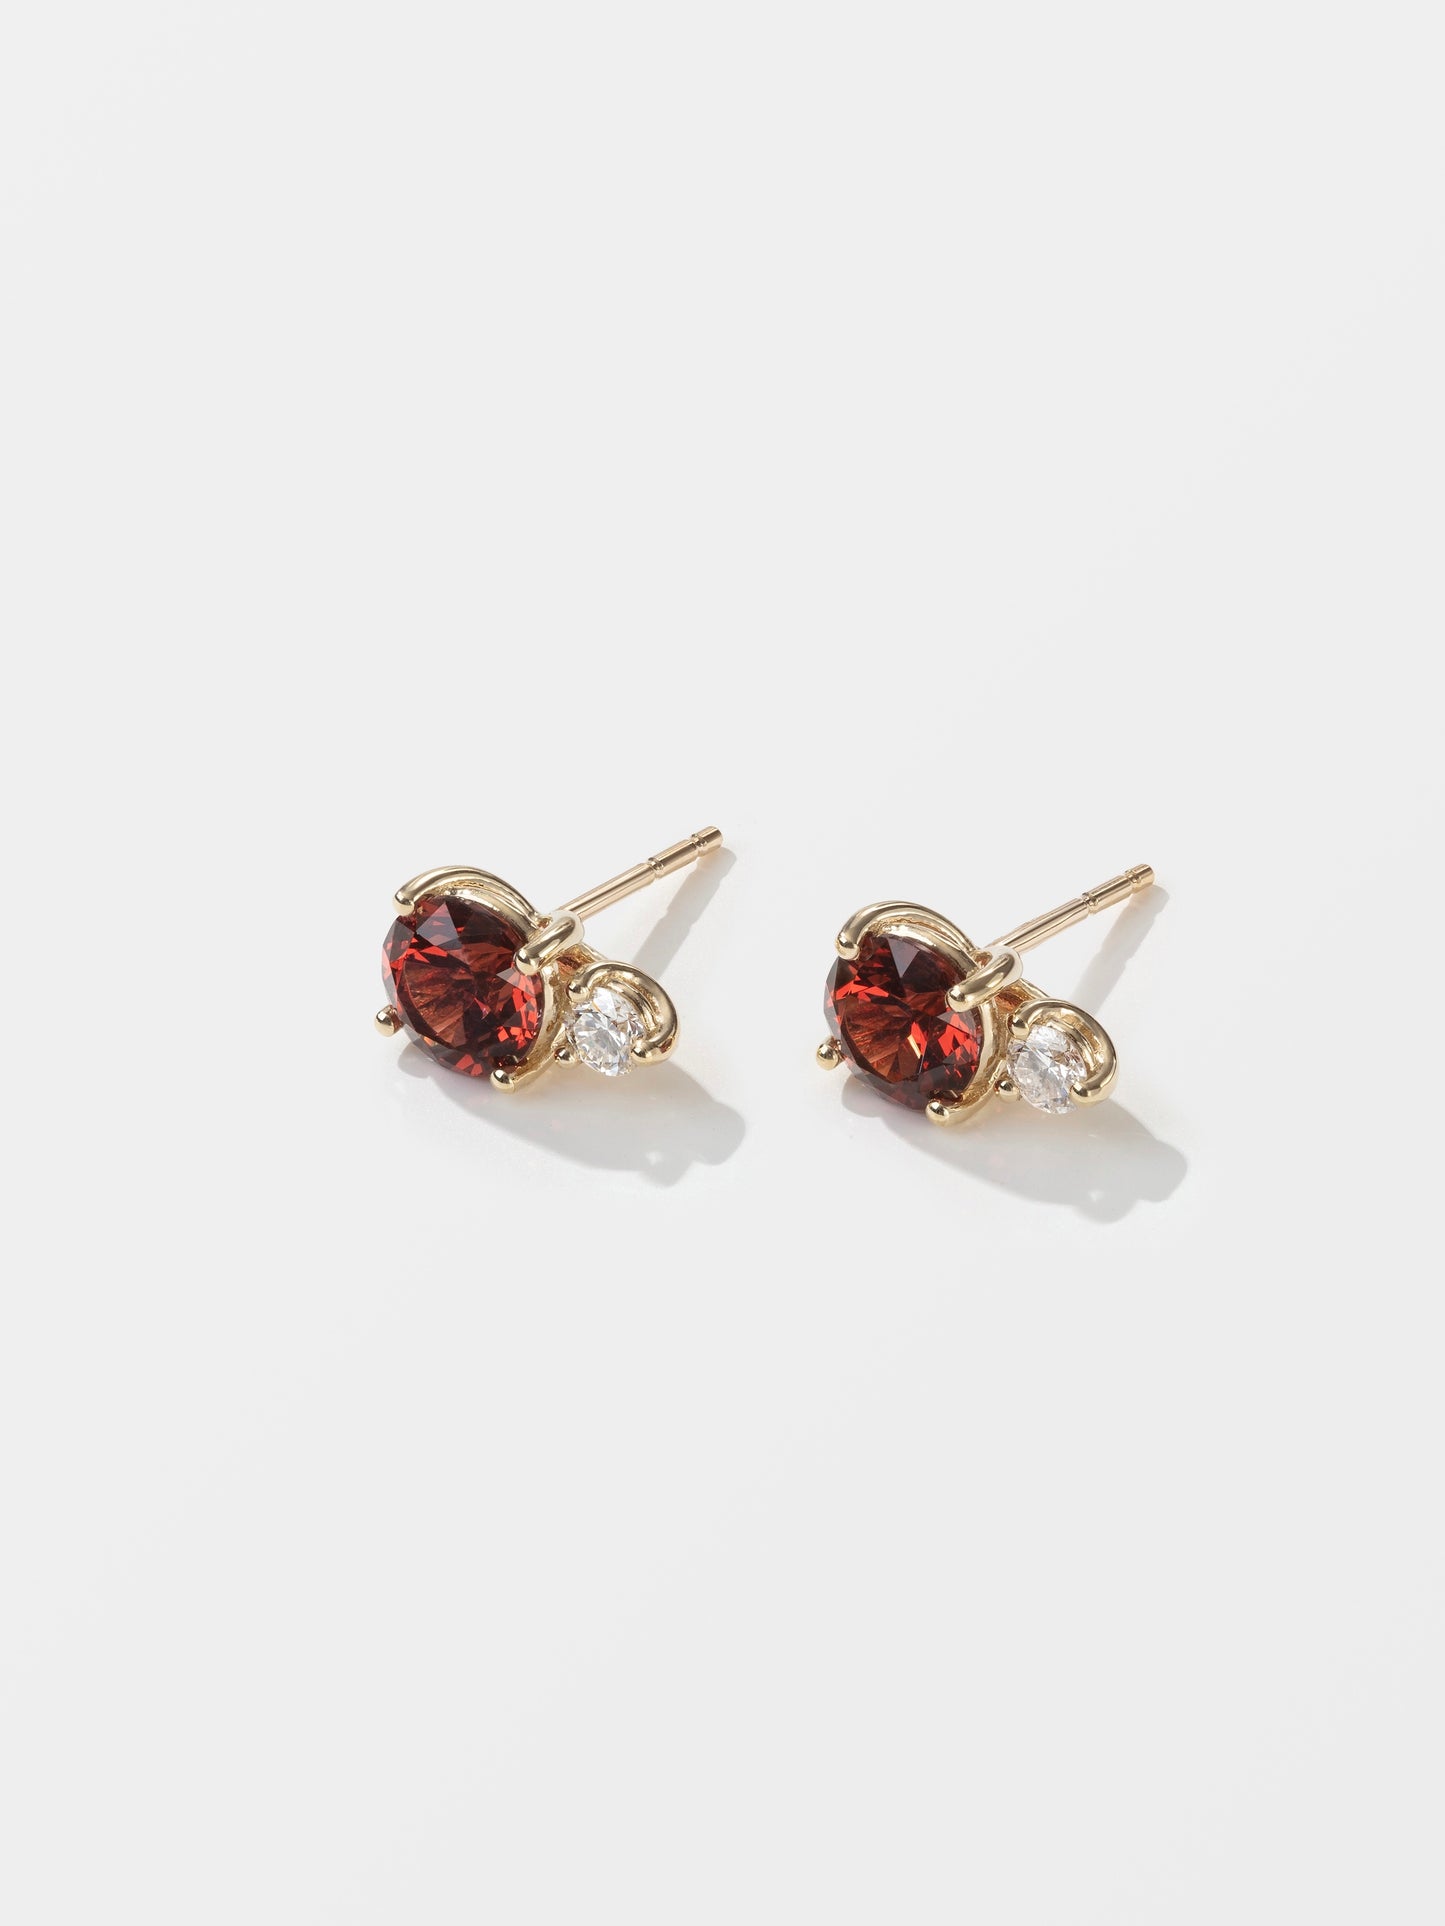 Juliette Kor Jewelry Fay earrings with red garnets and diamonds 